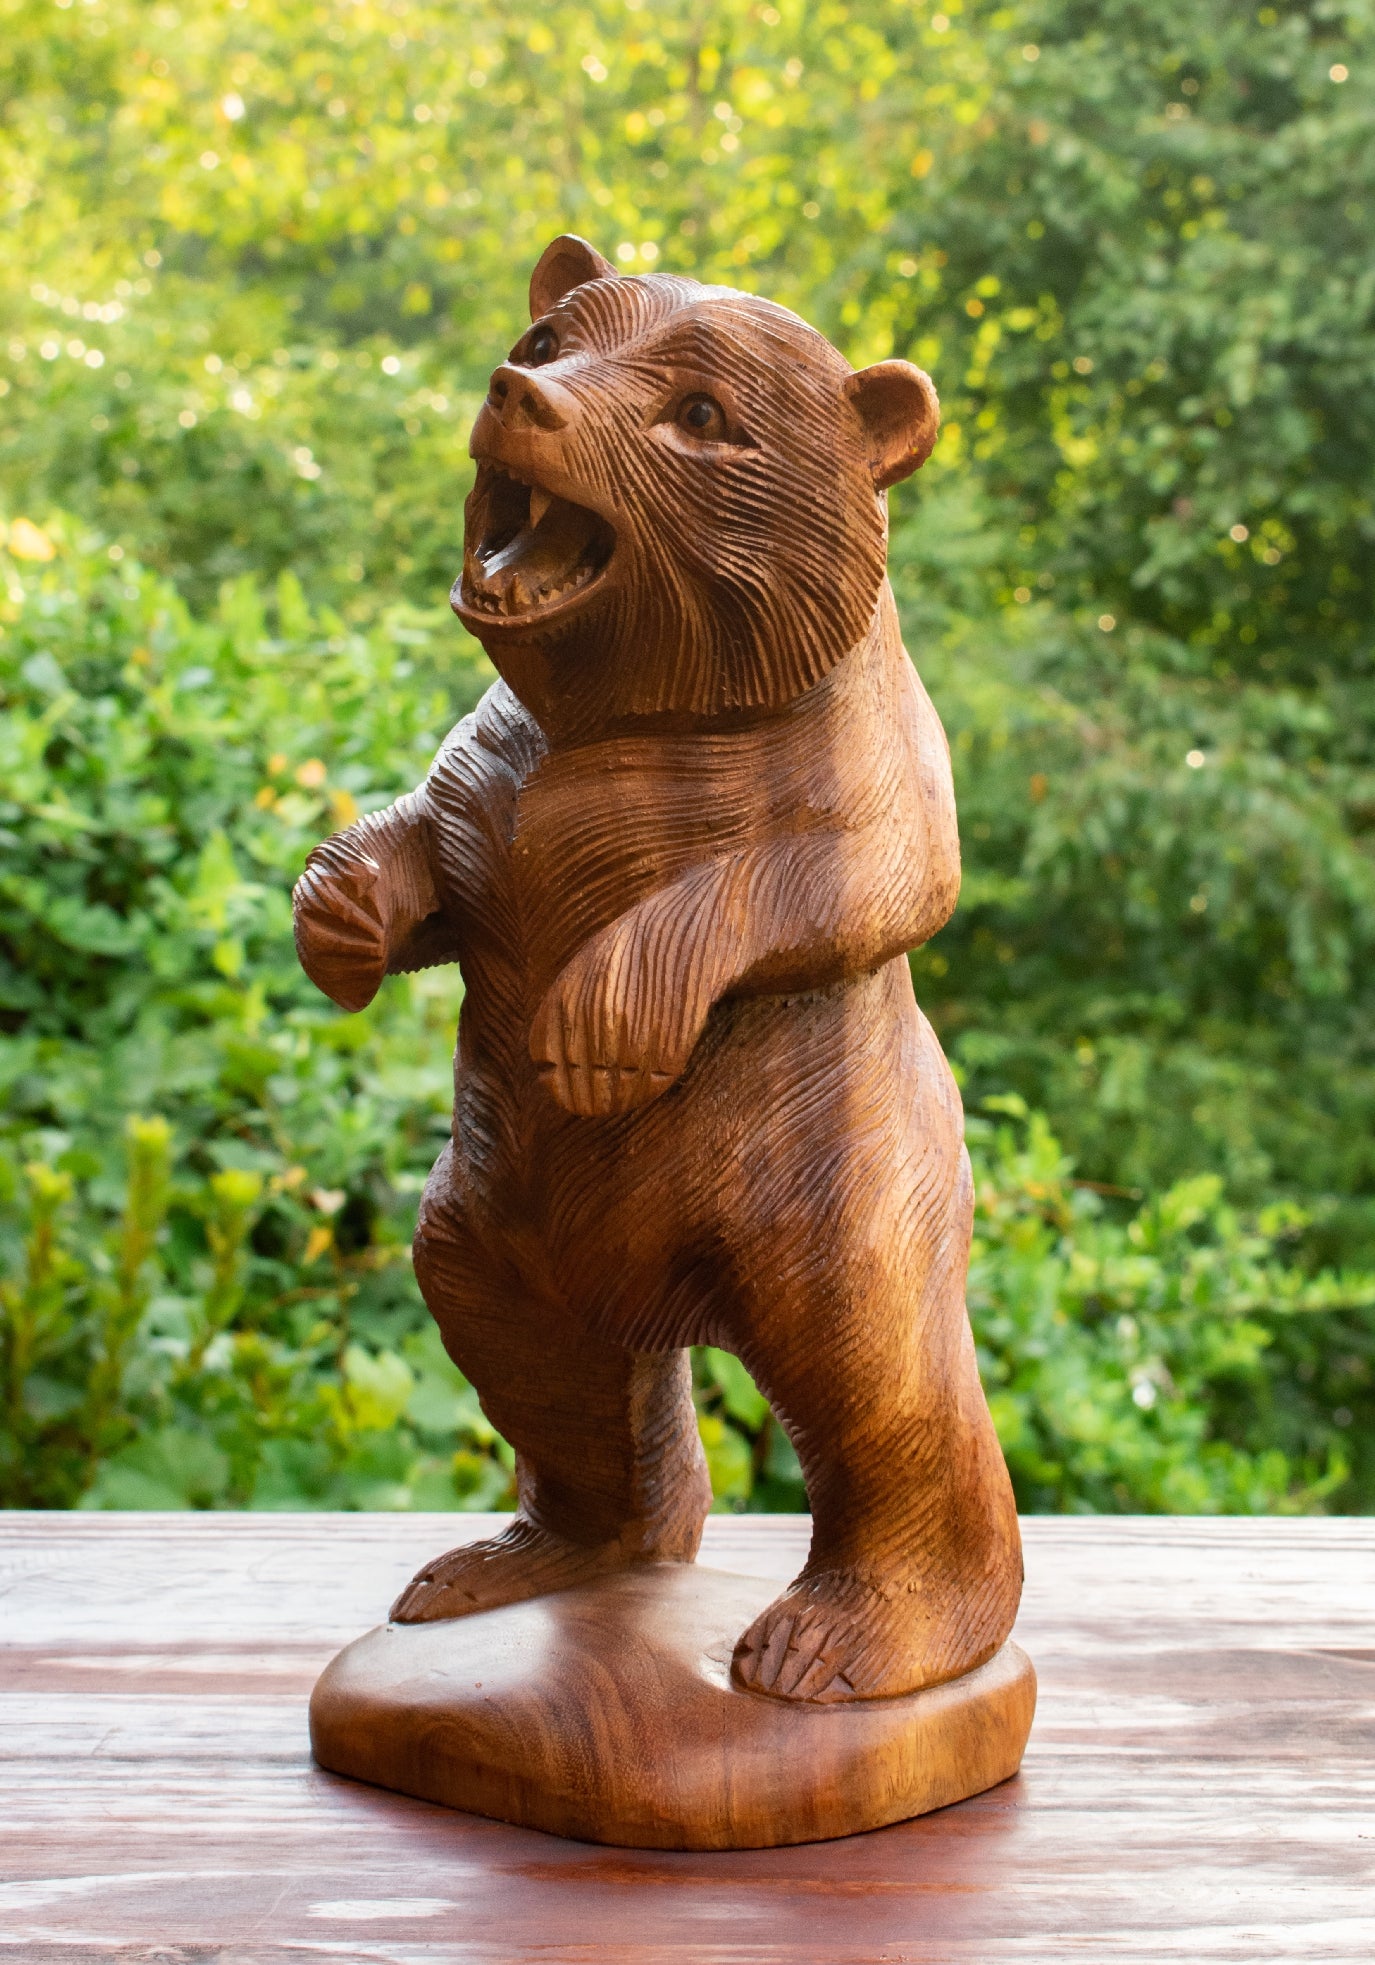 Wooden Hand Carved Grizzly Bear Standing Statue Handcrafted Handmade Figurine Sculpture Art Rustic Lodge Cabin Outdoor Indoor Home Decor Accent Decoration